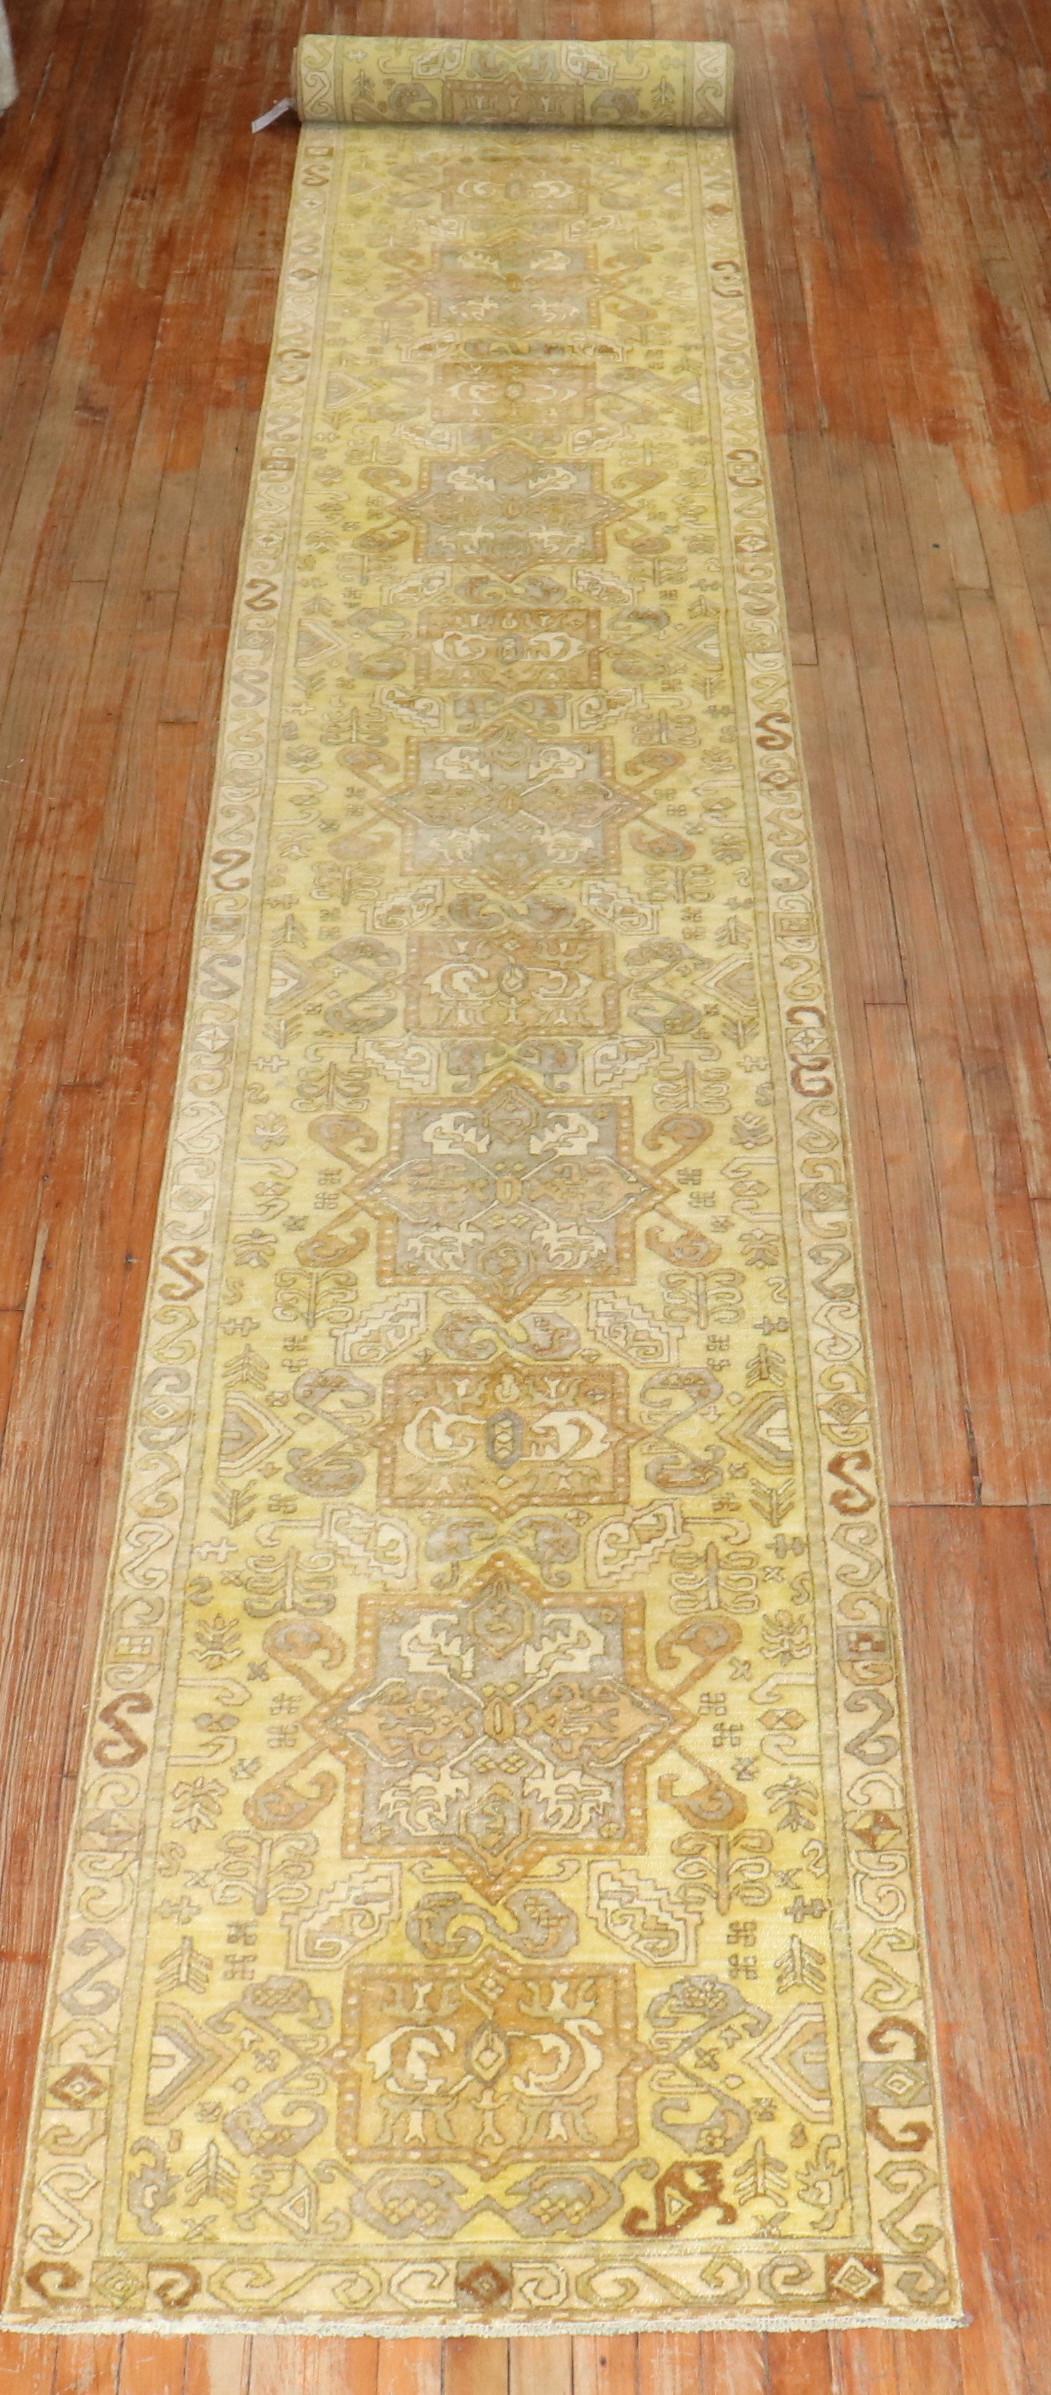 a rare early 20th Century German Hooked weave Long runner in predominantly yellow with a pattern seen in caucasian rugs

rug no.	31769
size	2' 10